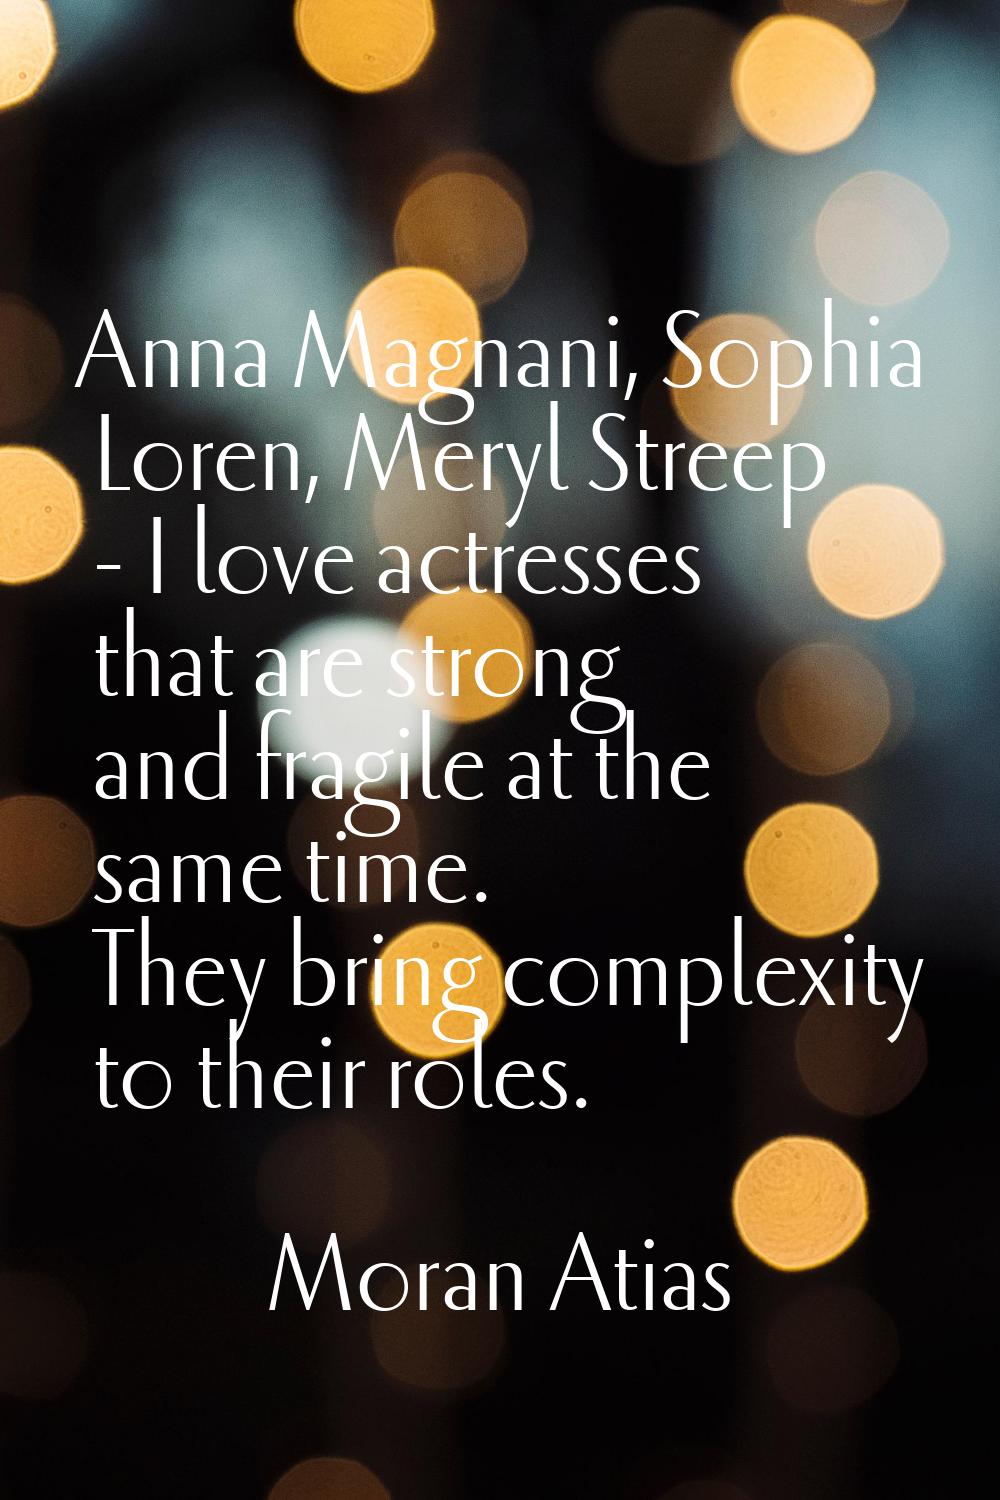 Anna Magnani, Sophia Loren, Meryl Streep - I love actresses that are strong and fragile at the same